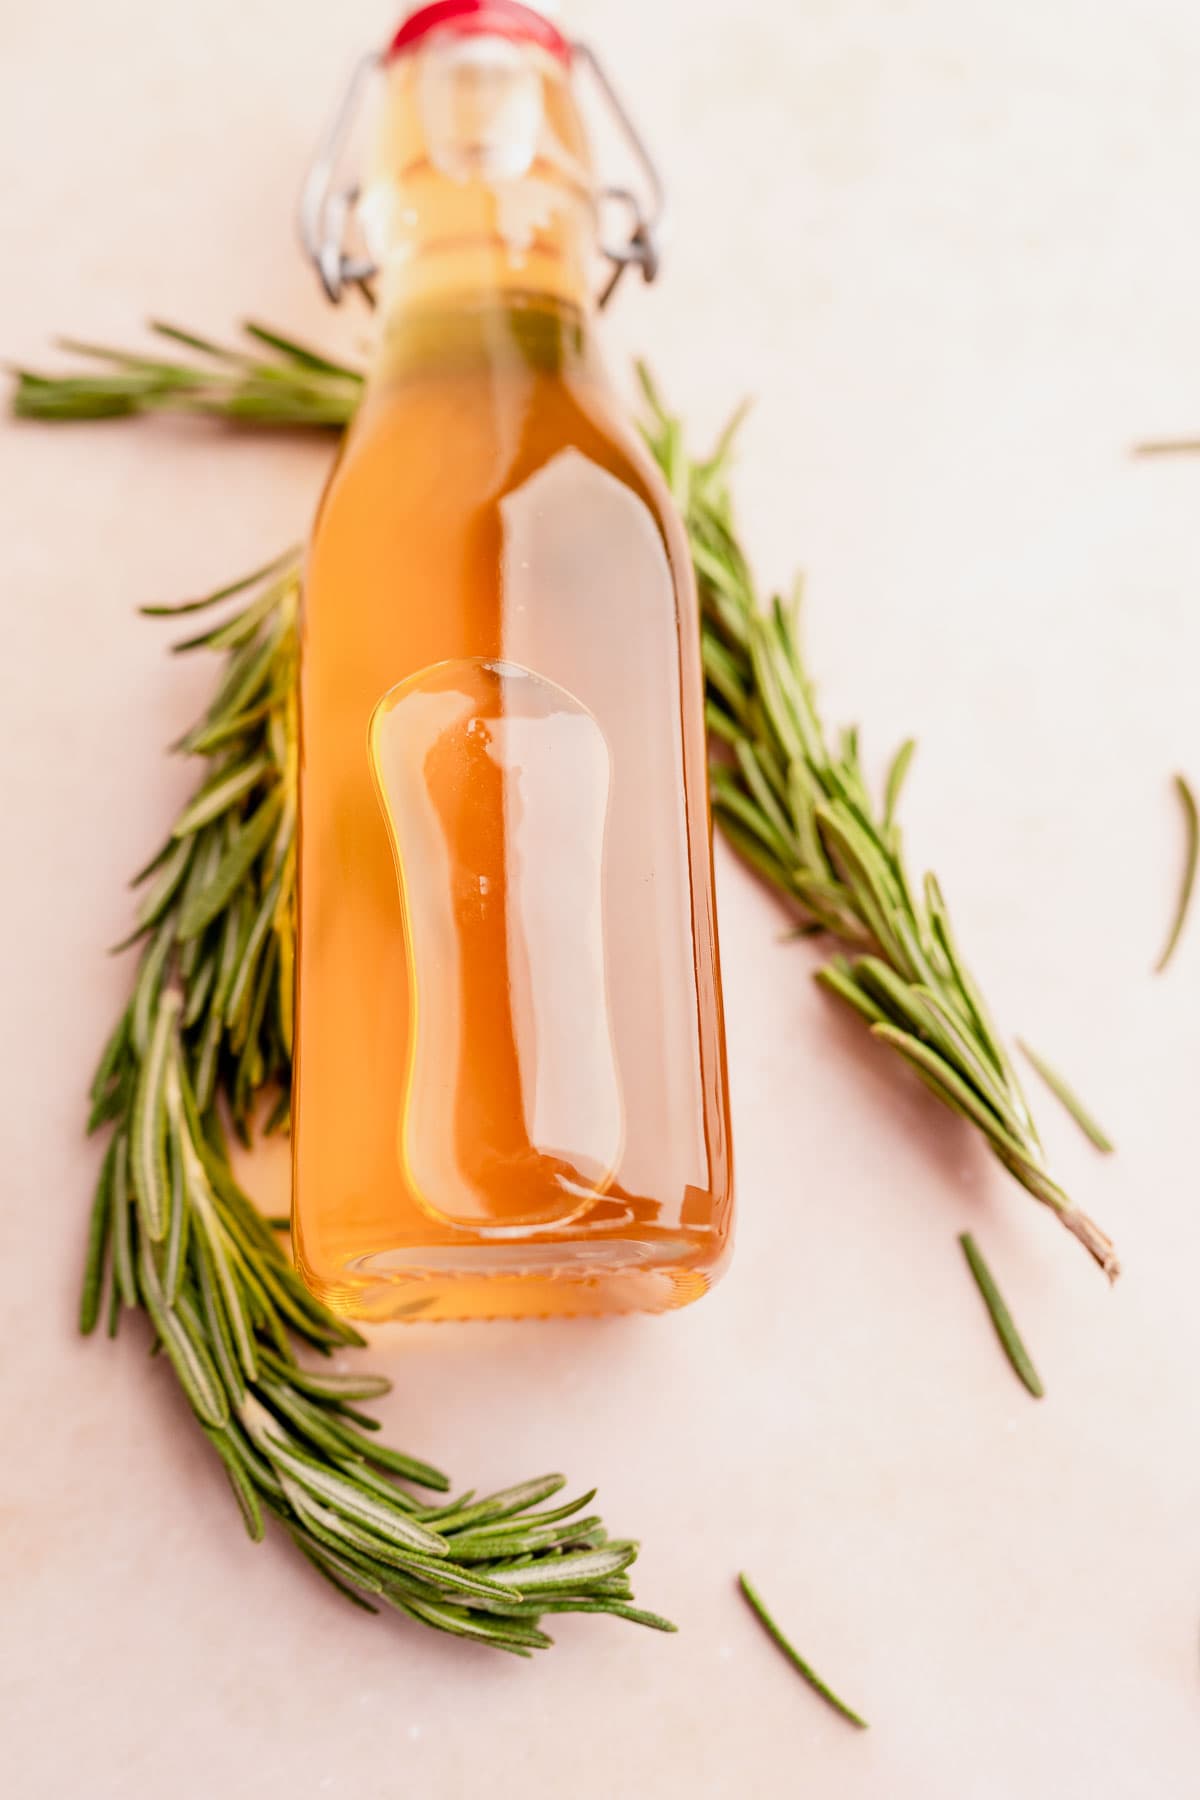 A bottle of rosemary simple syrup on a white background.